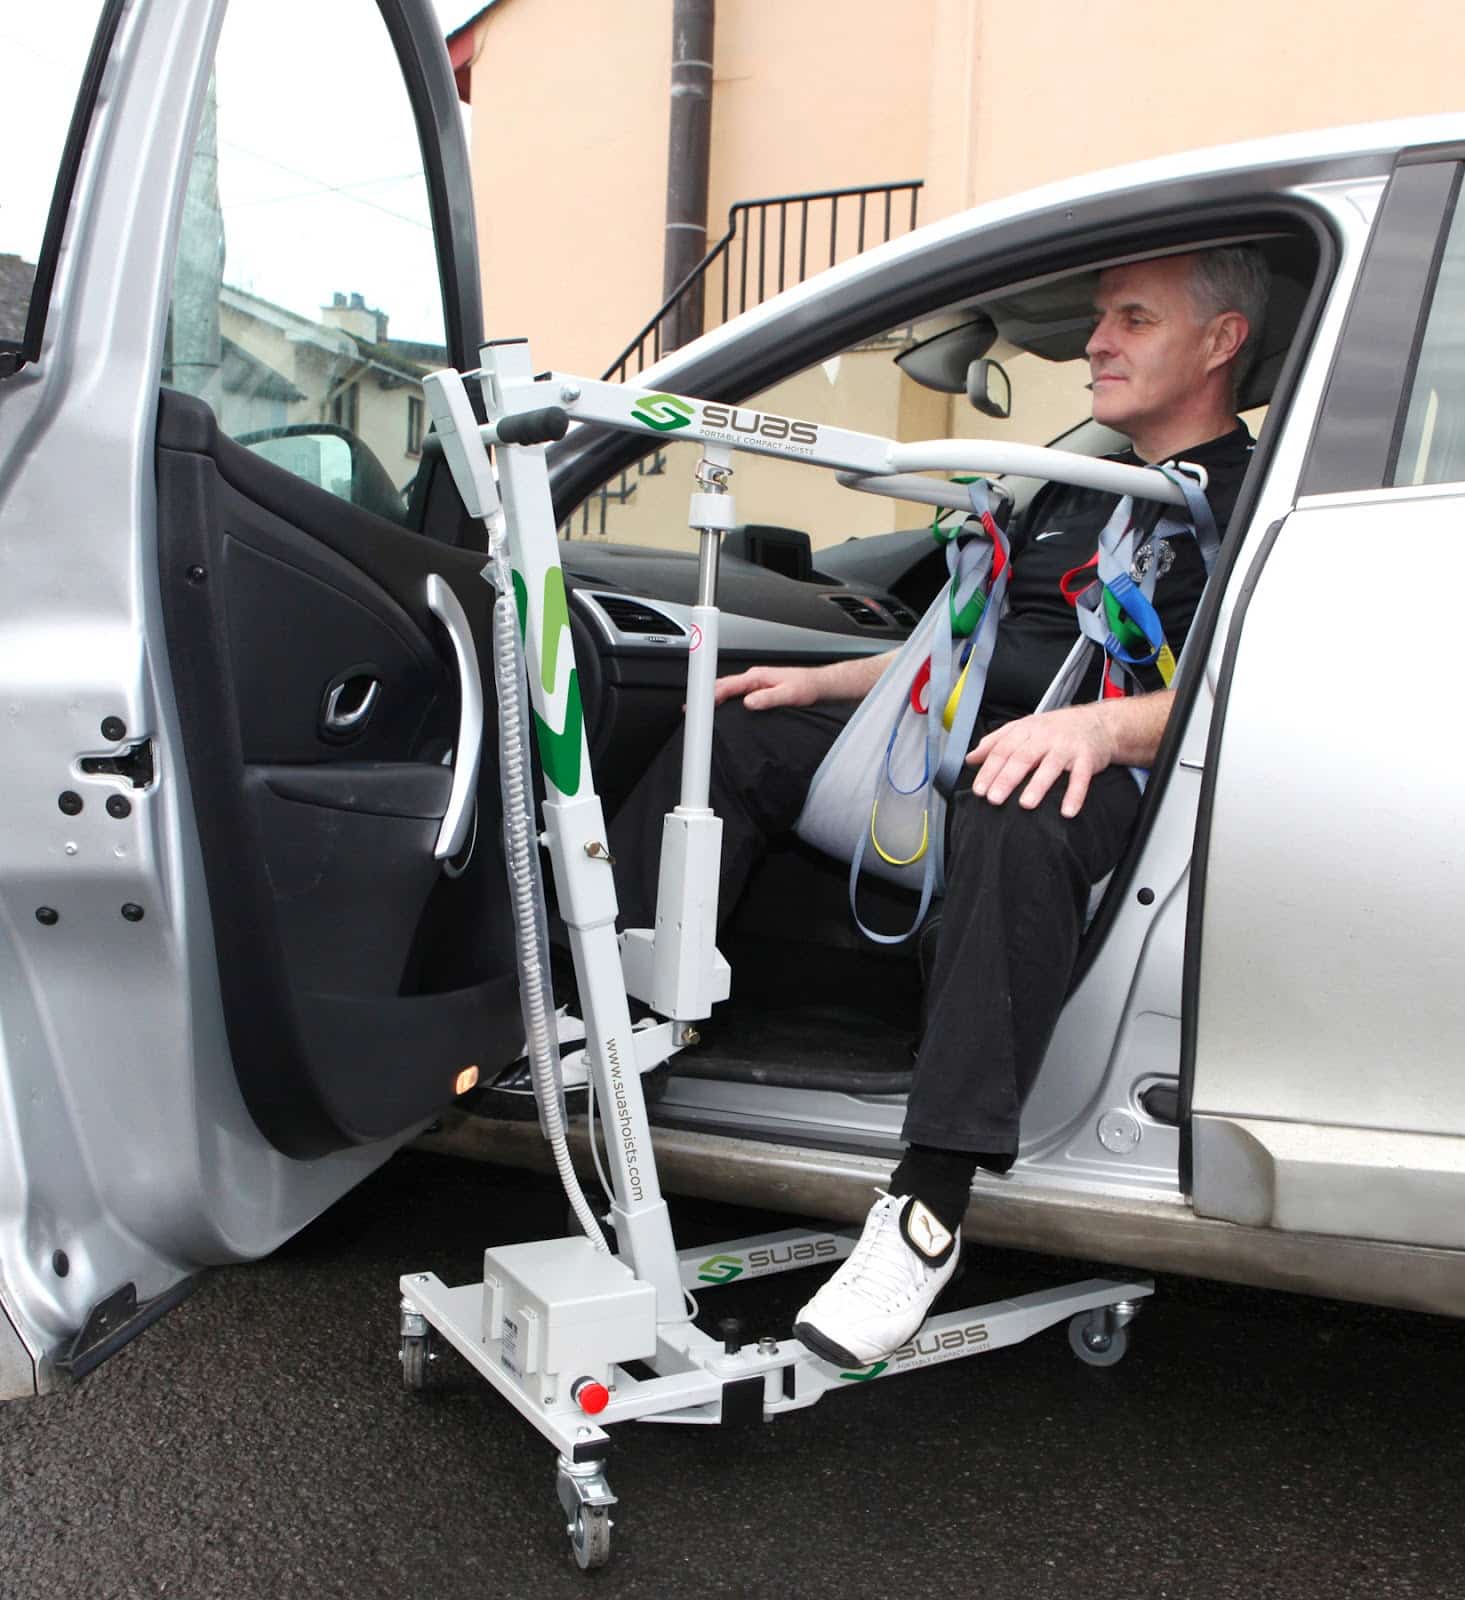 Mobility Products for Disabled People: Suas Portable Hoists